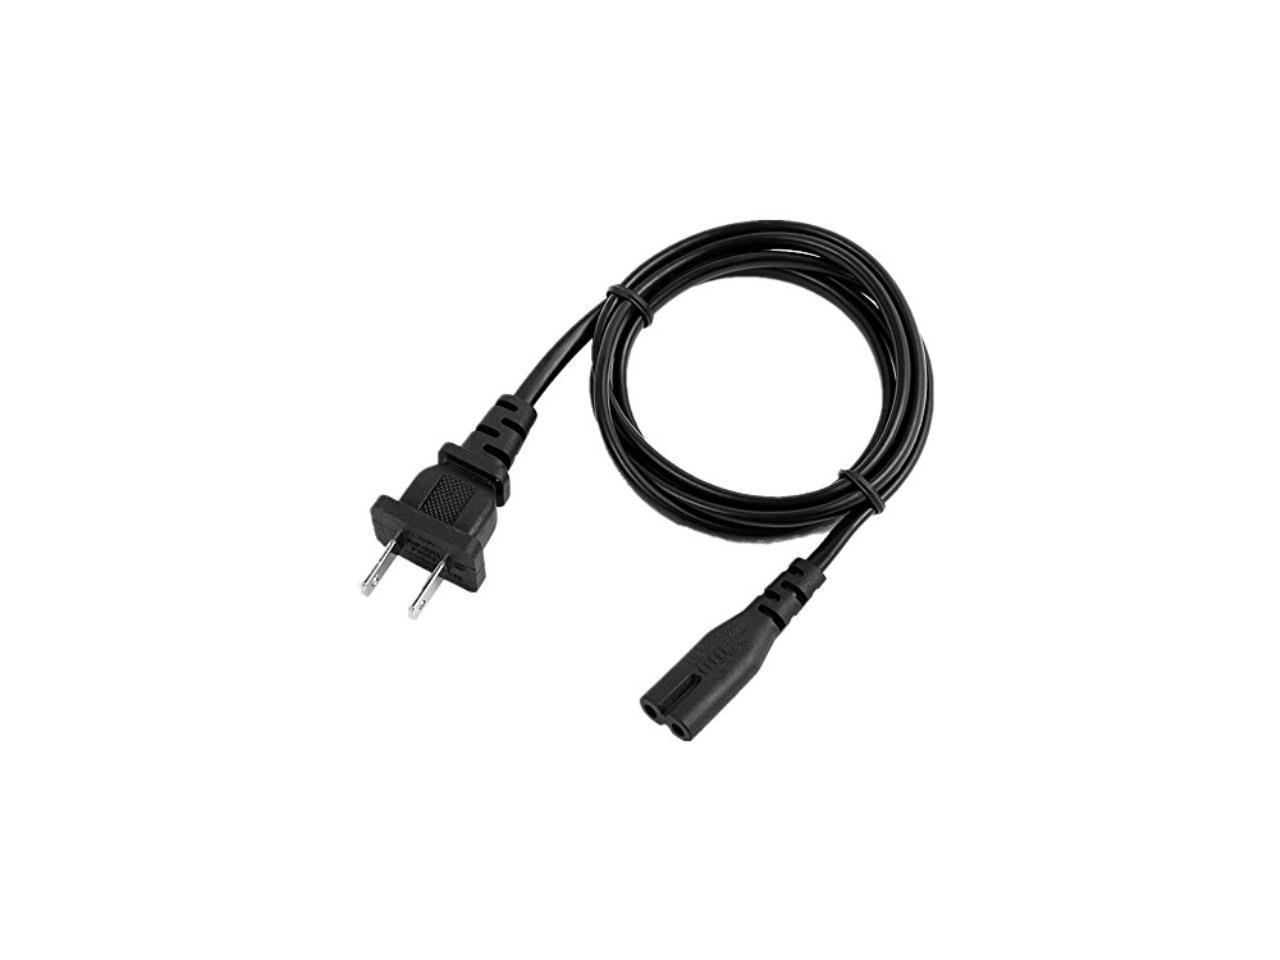 50H5G LED TV 50H5 PlatinumPower AC Power Cable Cord for Hisense 40H5 